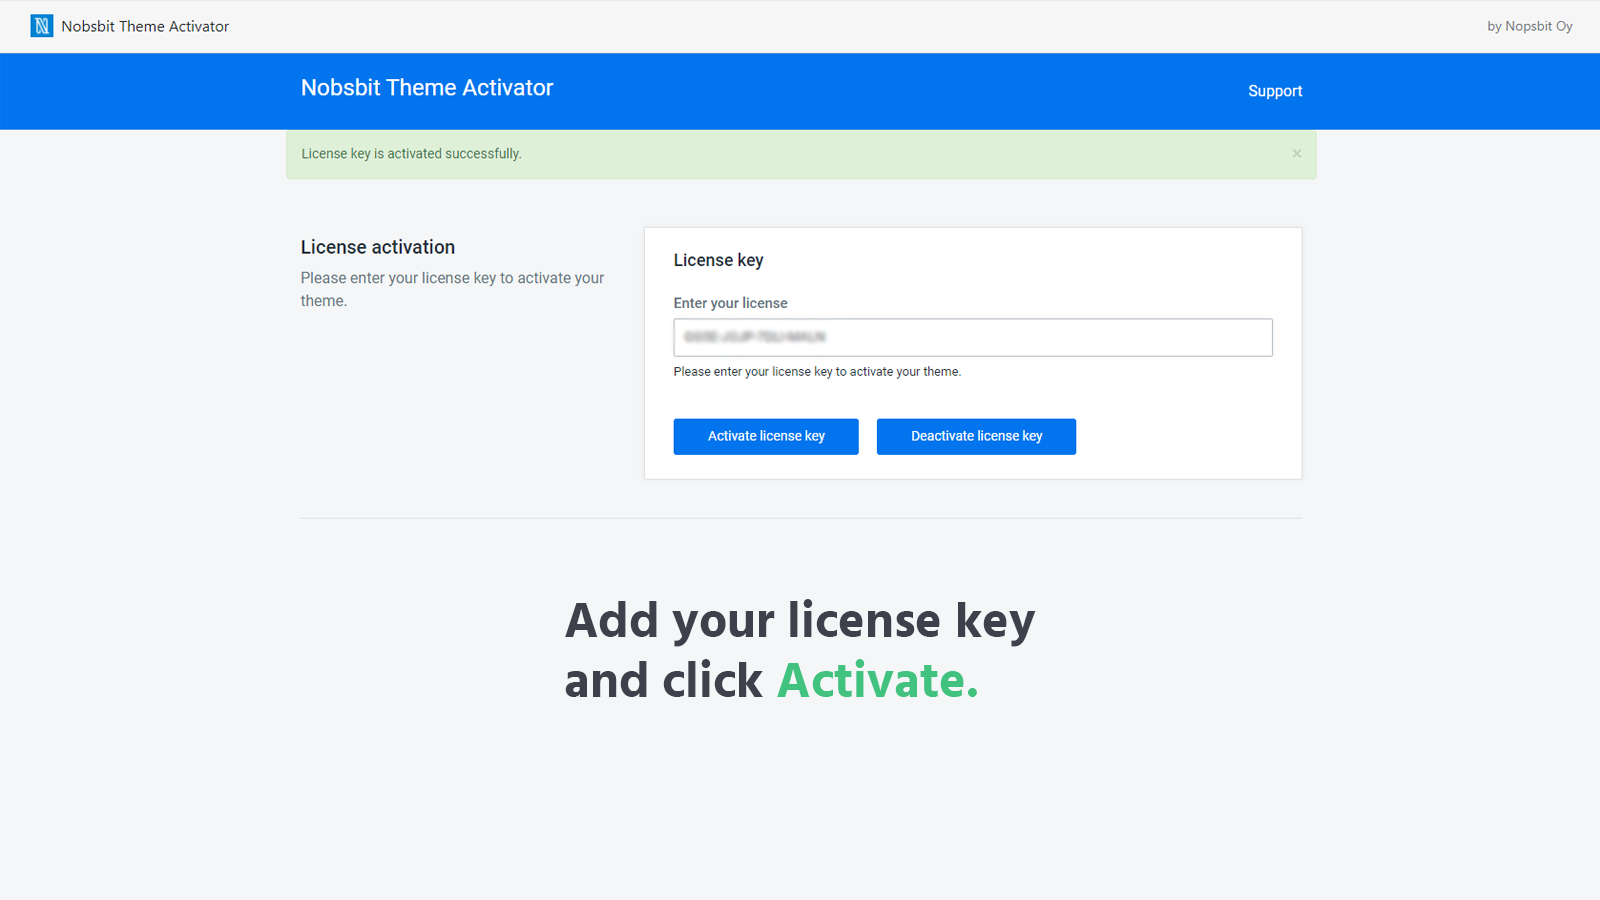 Add your license key and click activate